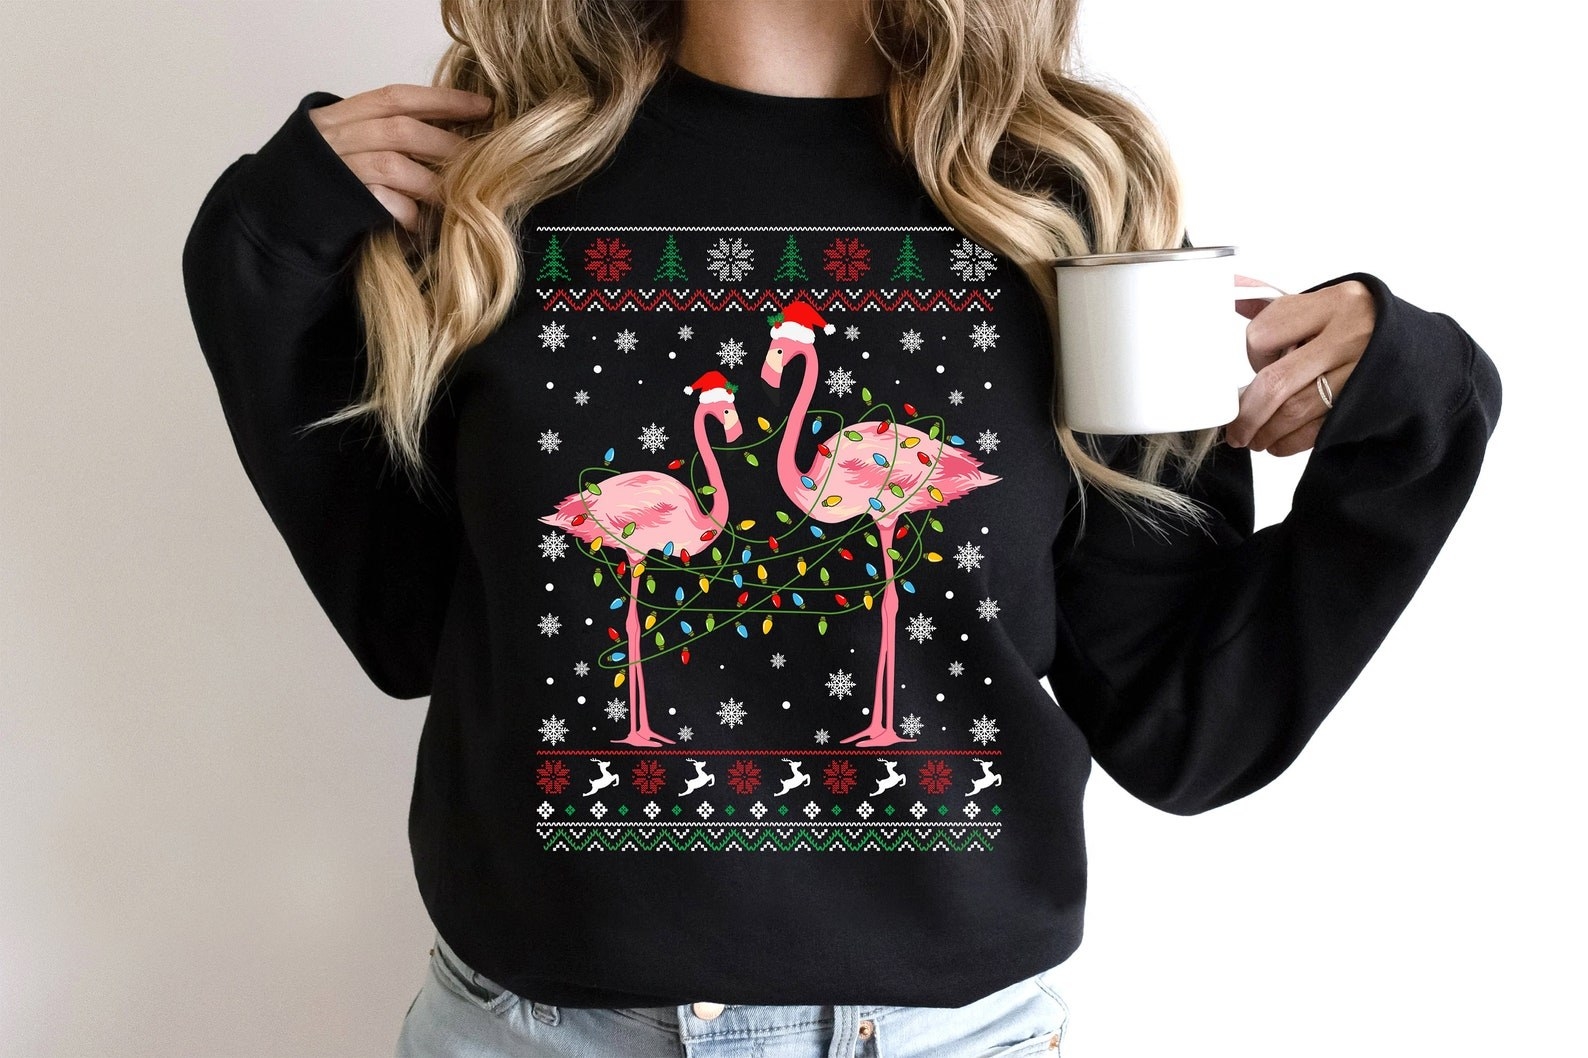 Model wearing Christmas sweater with flamingo pattern